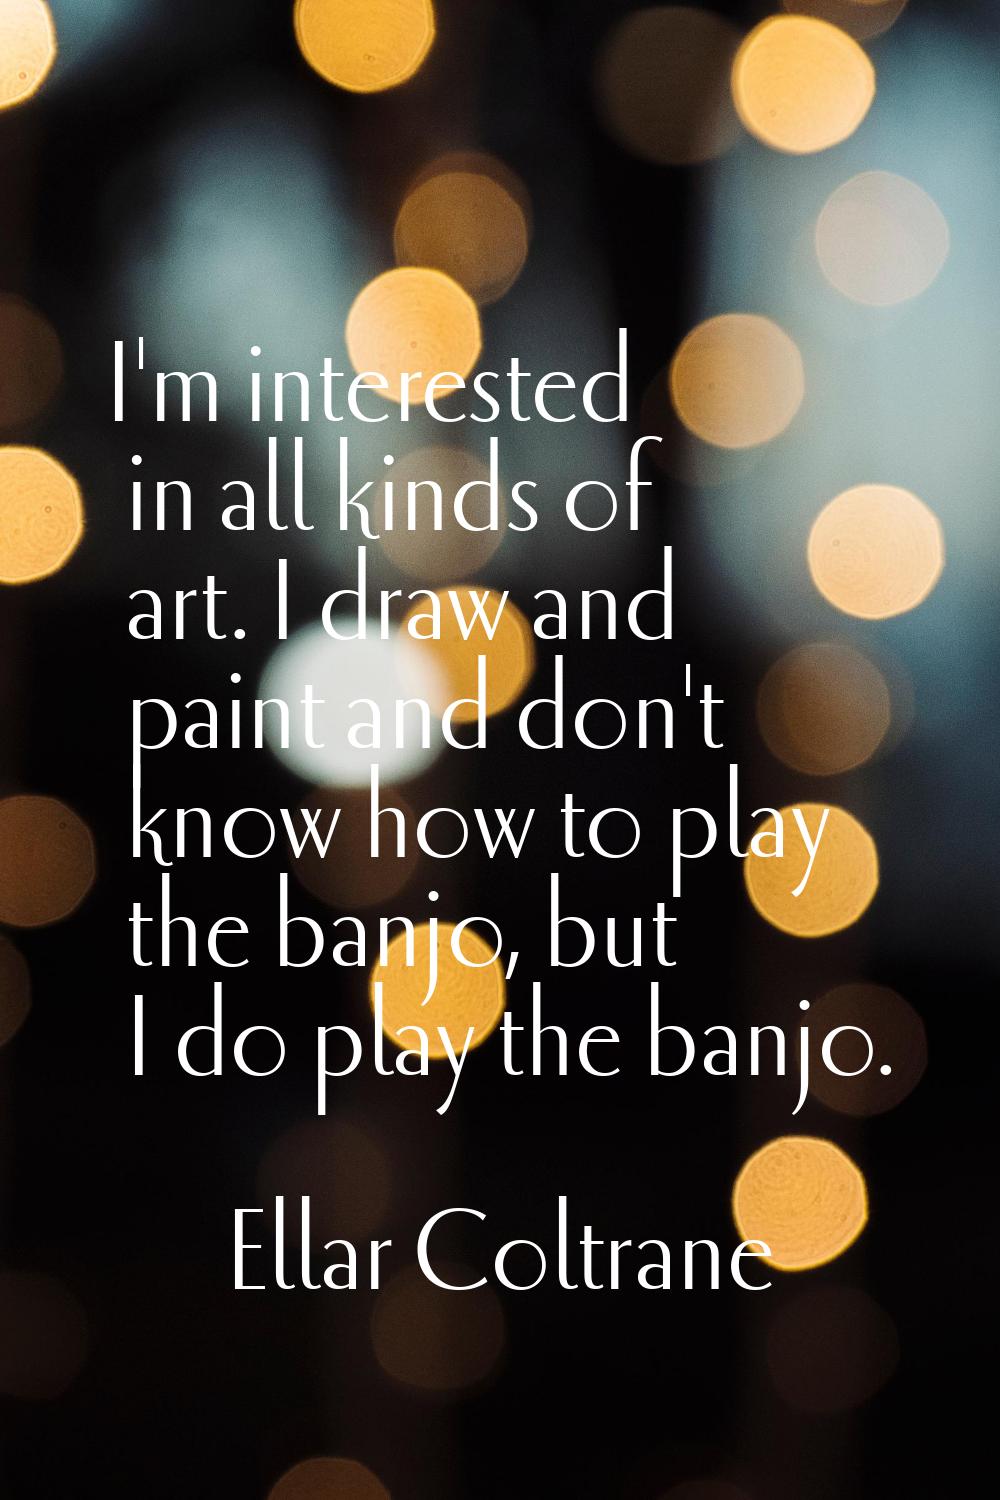 I'm interested in all kinds of art. I draw and paint and don't know how to play the banjo, but I do